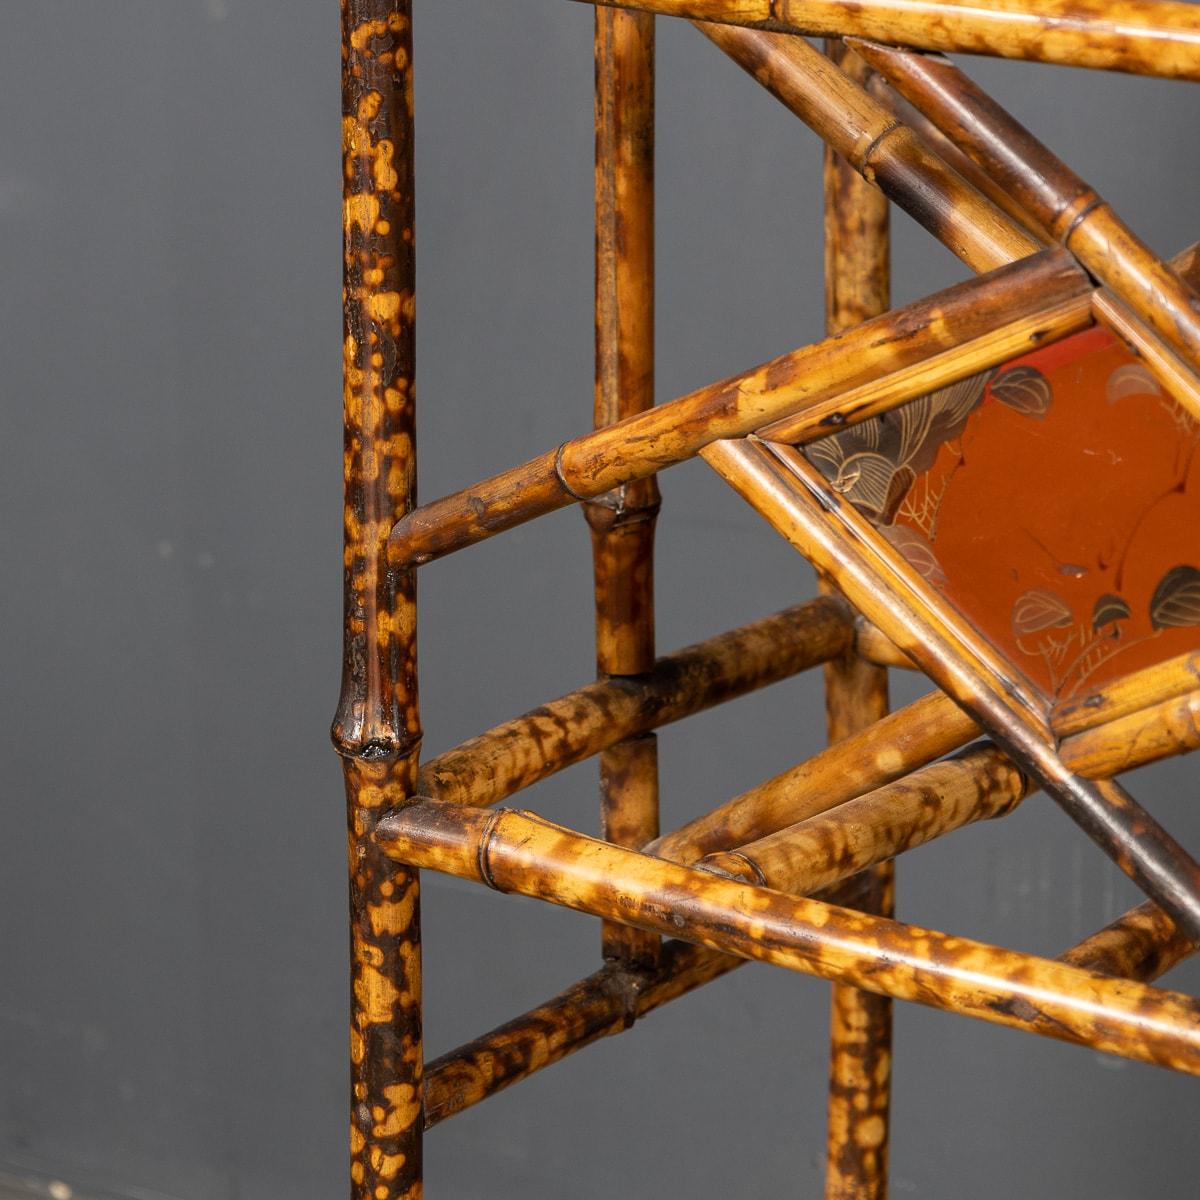 20th Century Bamboo Magazine Rack with a Japanesque Lacquer Finish, circa 1920 For Sale 4